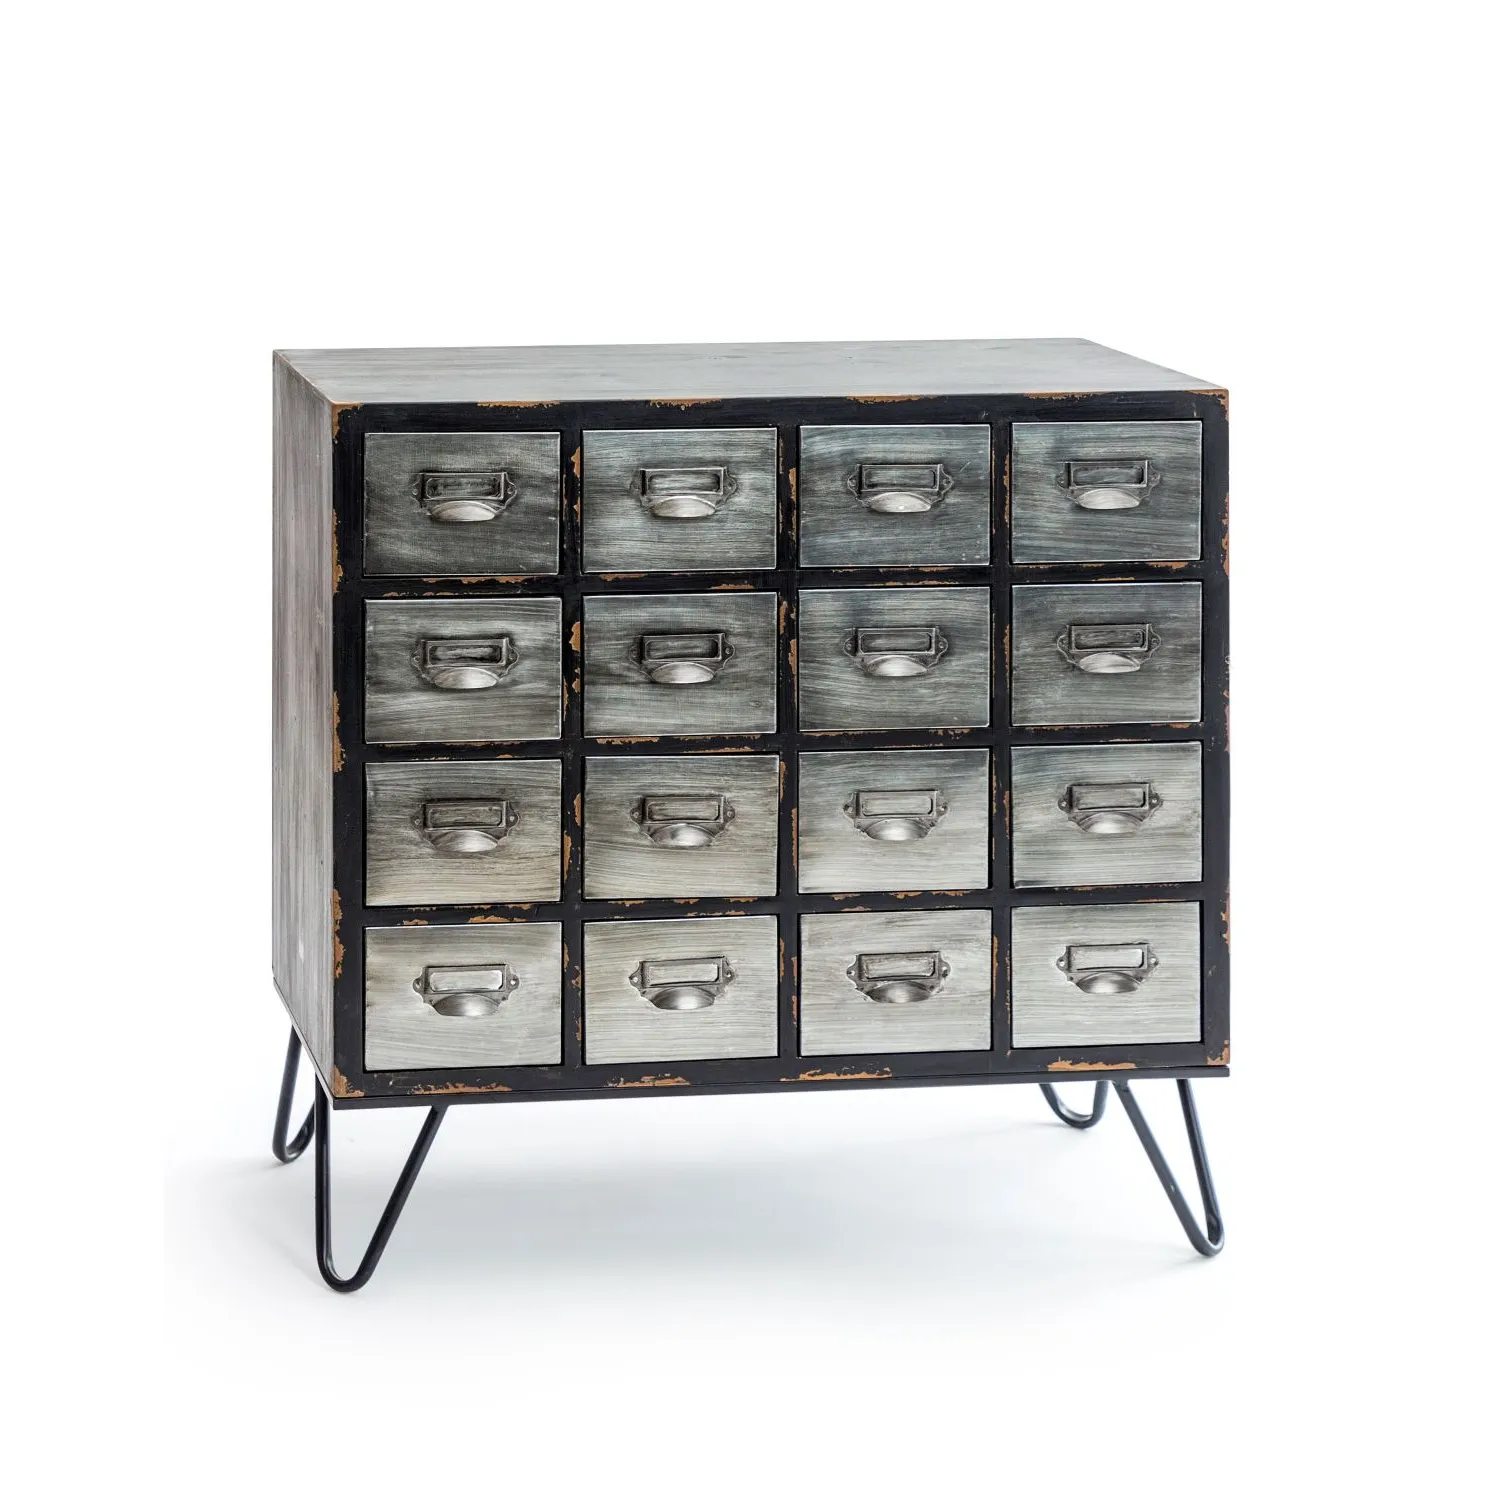 Brushed Steel Multi Drawer Apothecary Cabinet Hairpin Legs